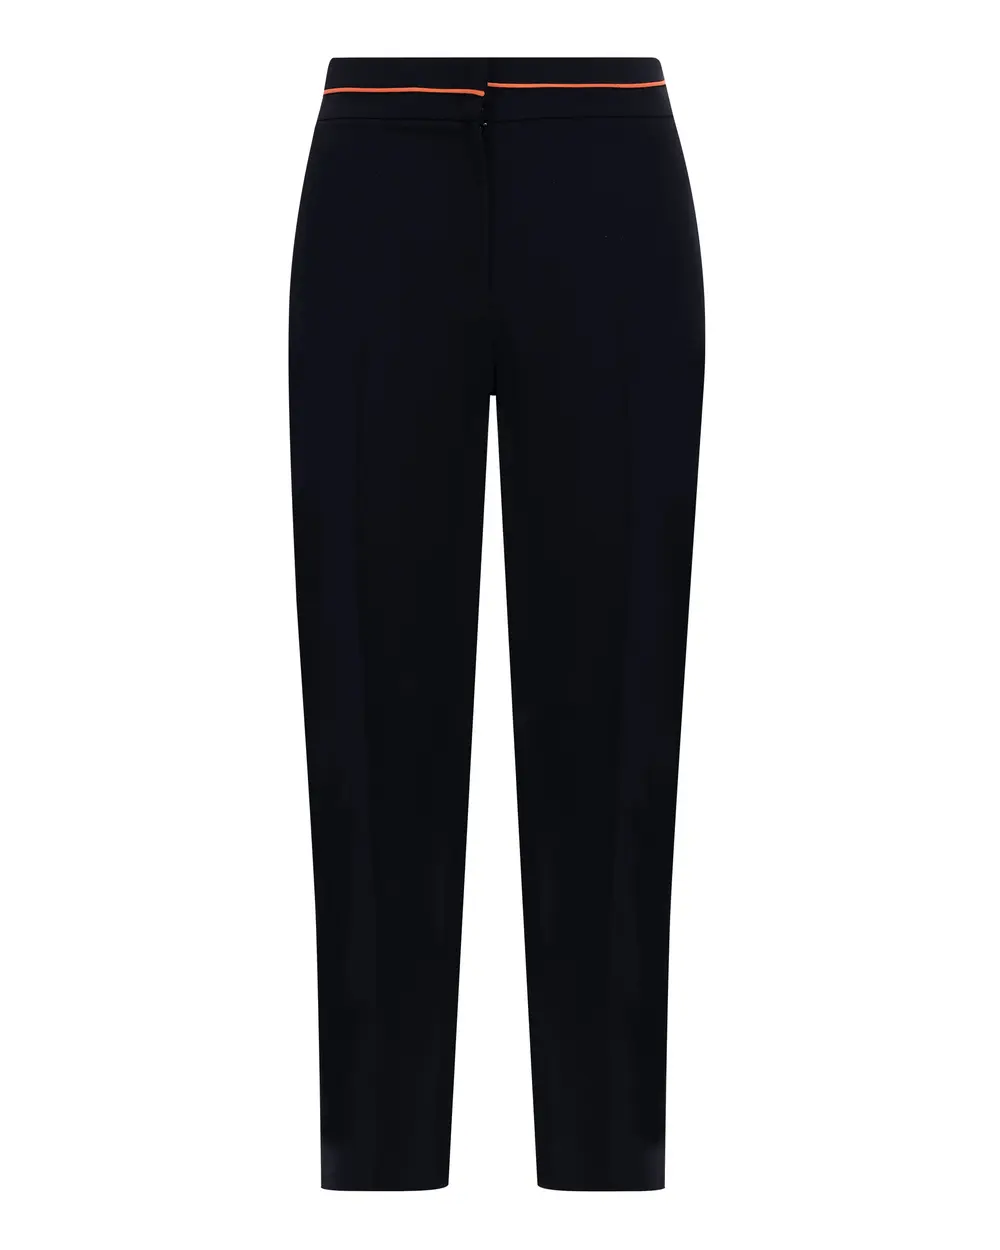 Stripe Detailed Classic Cut Ankle Length Trousers